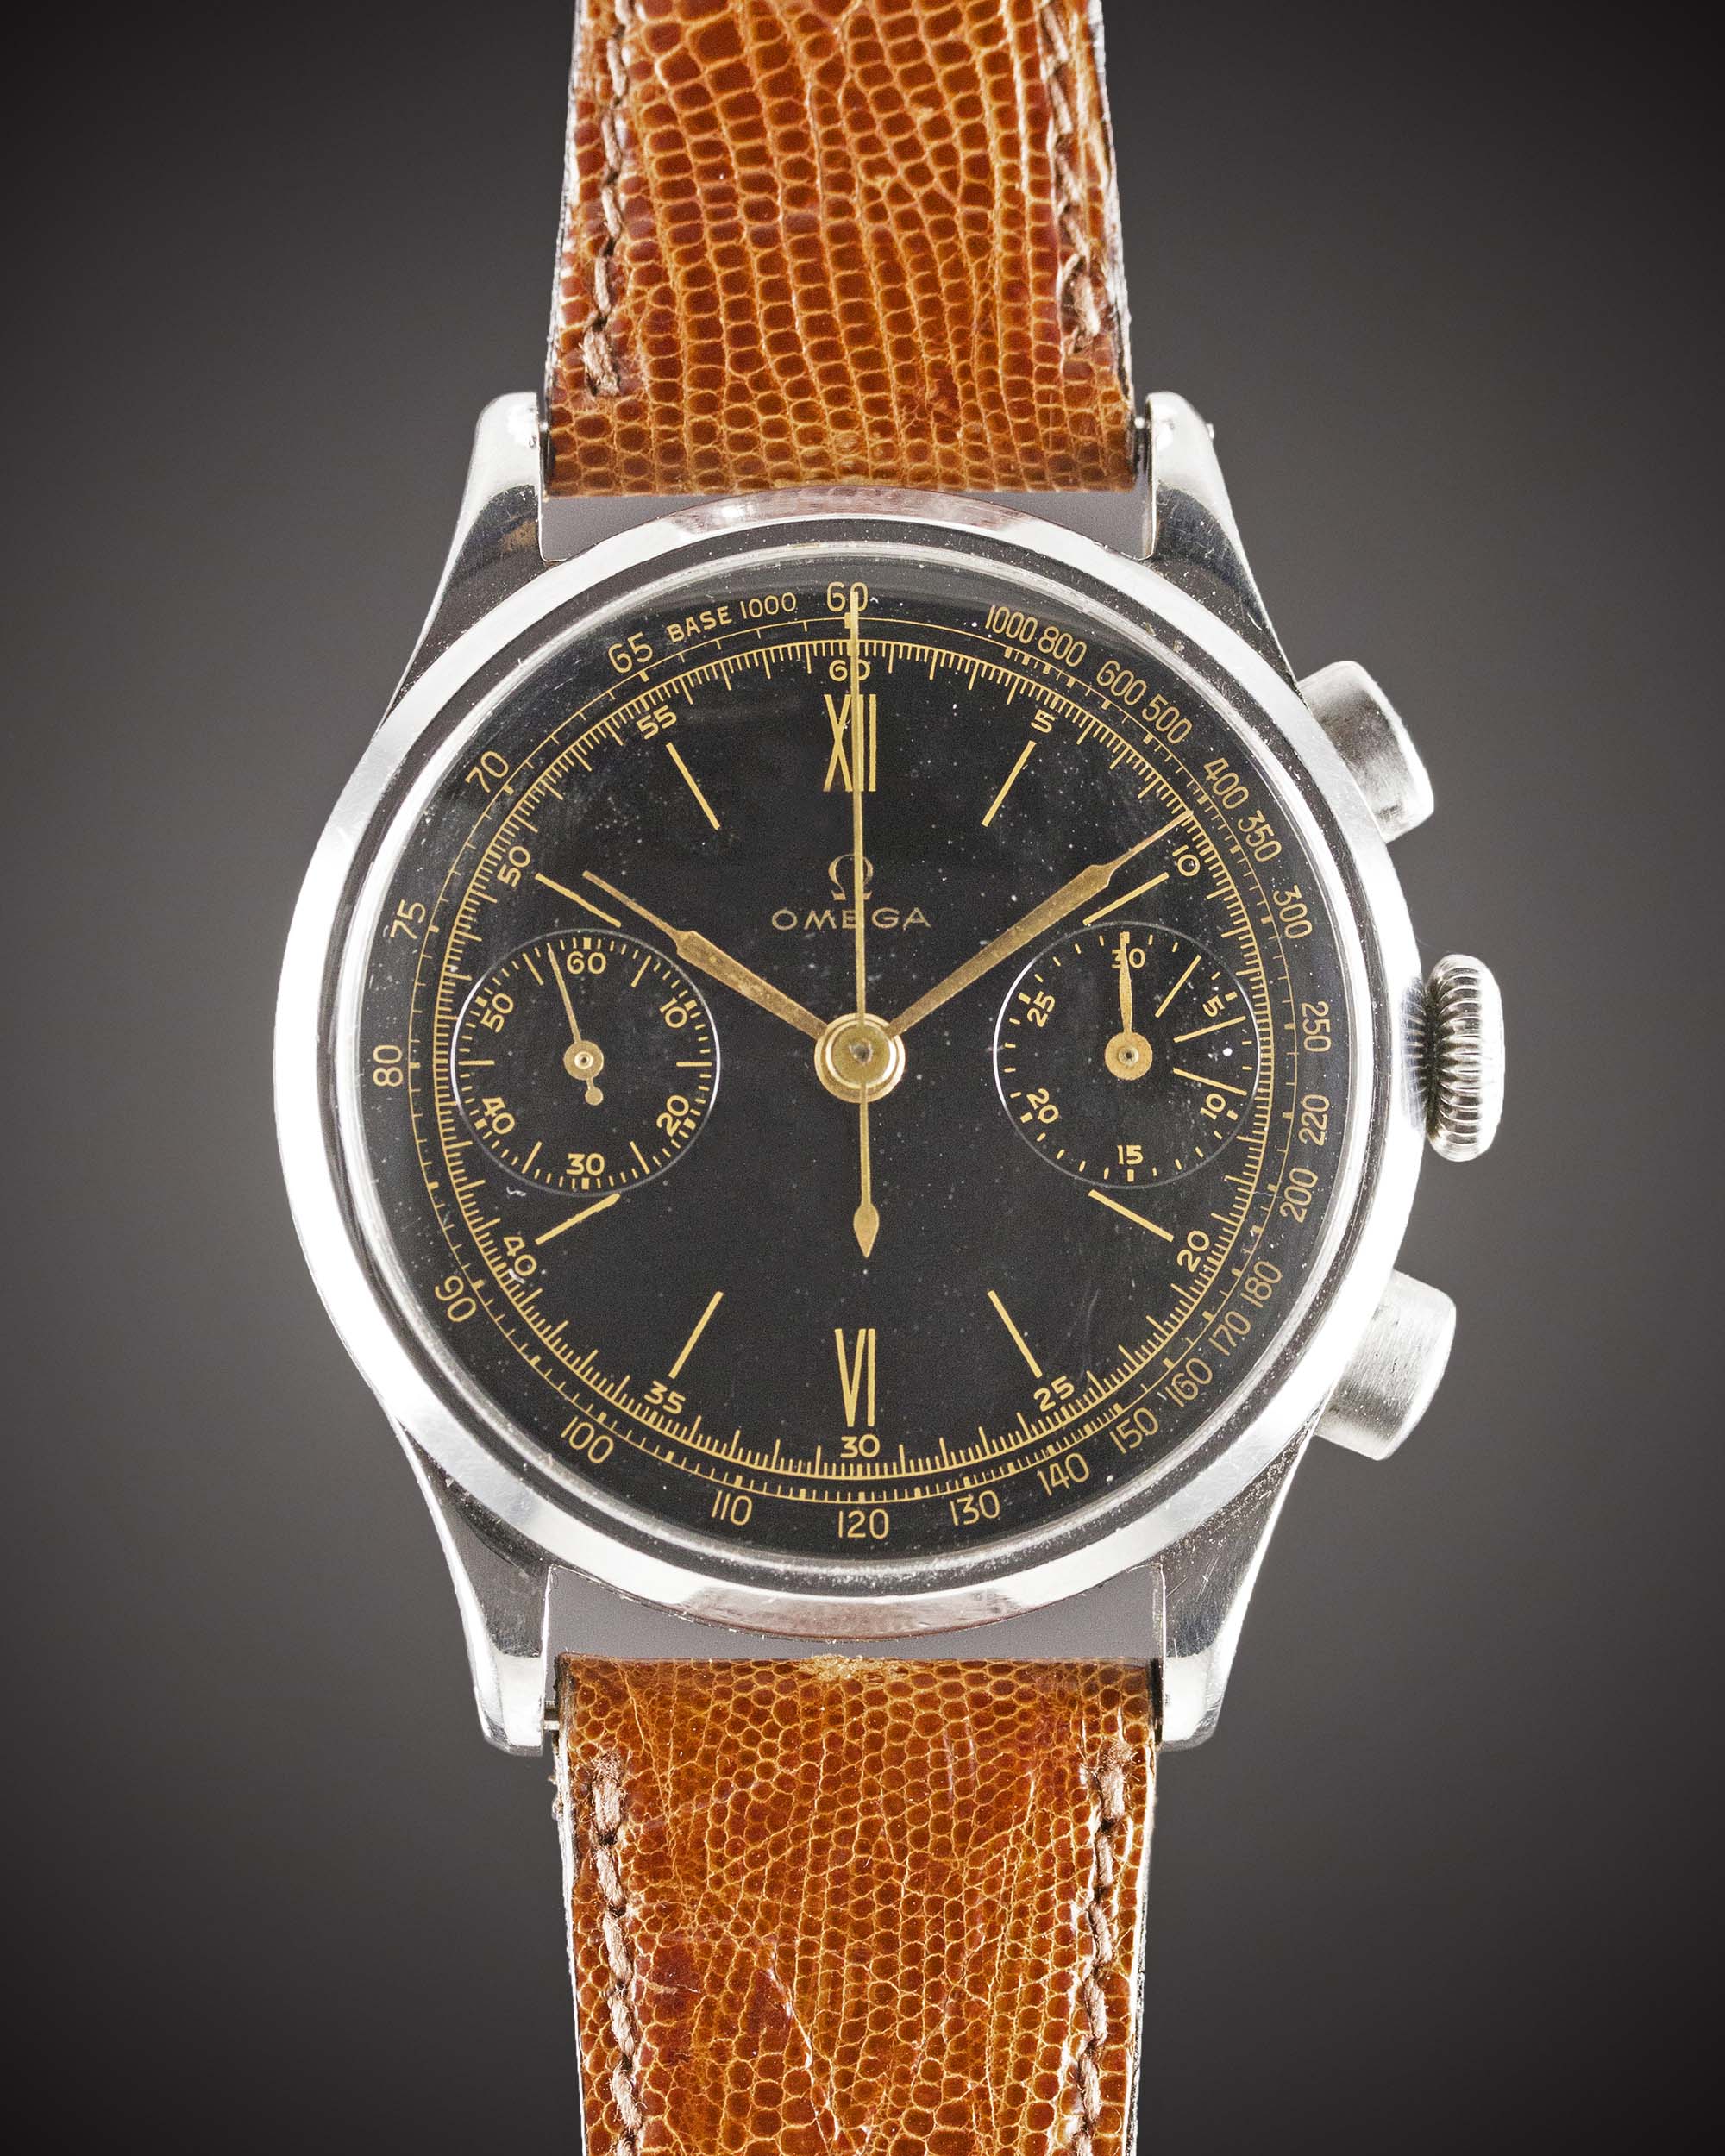 A VERY RARE GENTLEMAN'S LARGE SIZE STAINLESS STEEL OMEGA "33.3" CHRONOGRAPH WRIST WATCH CIRCA - Image 2 of 11